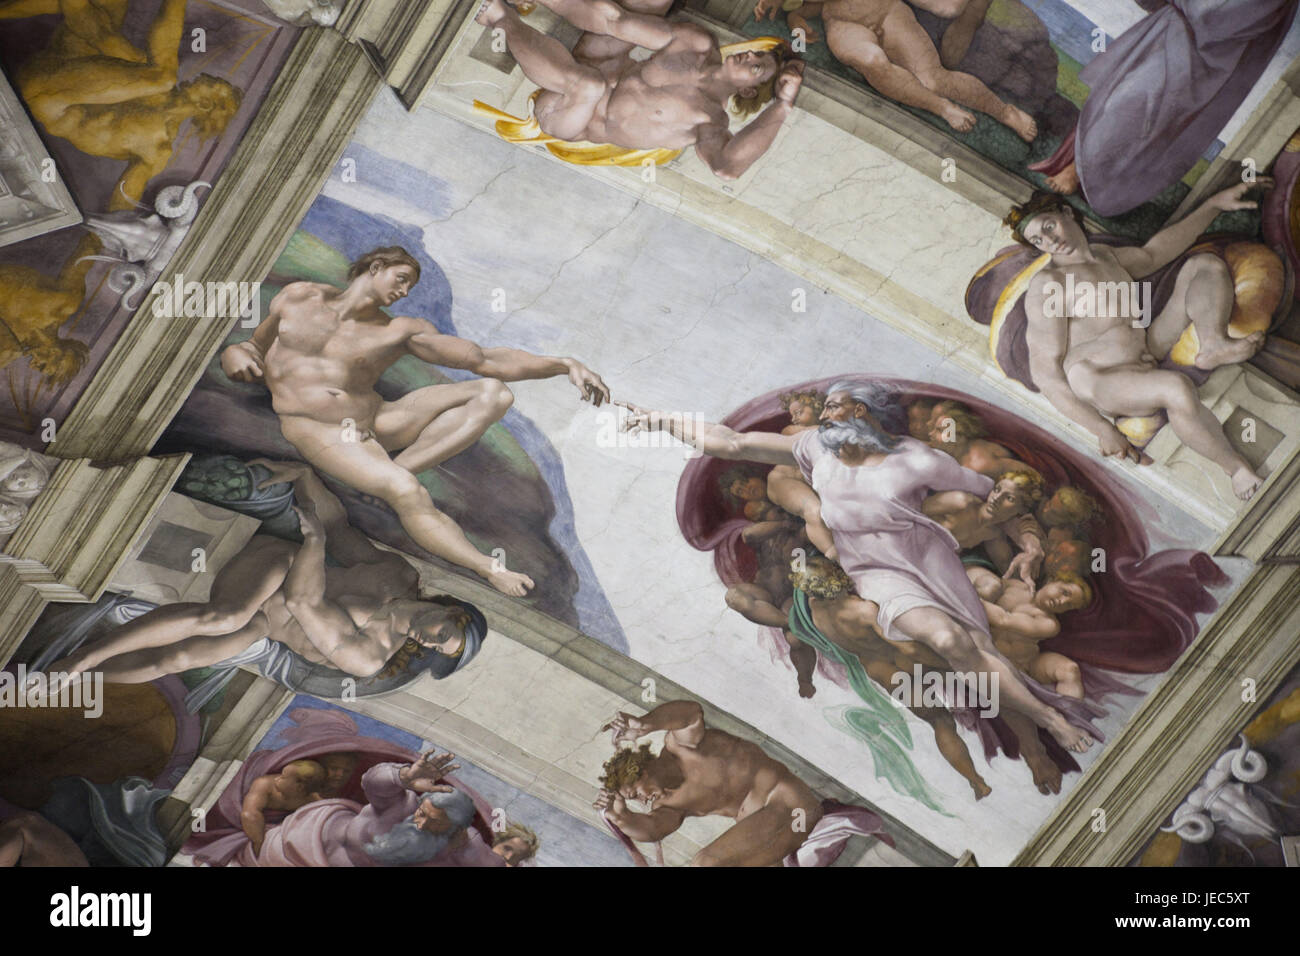 Italy, Rome, Vatican, Vatican broad museums, Sistine band, Michelangelo frescoes, The creation of Adam, Stock Photo